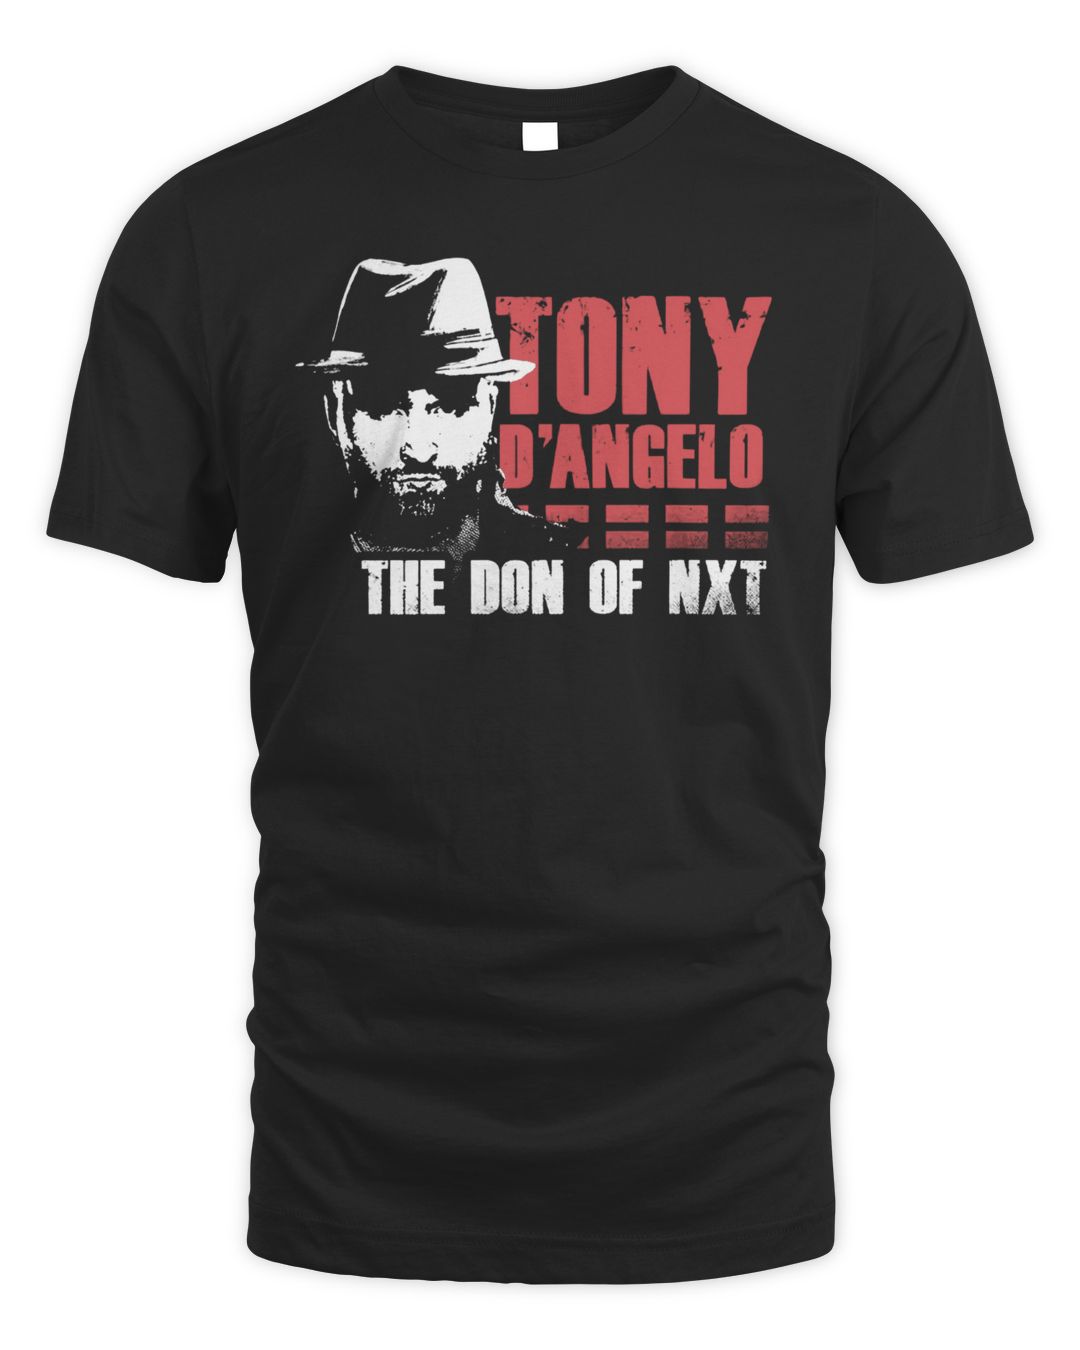 Tony D’Angelo The Don of NXT Shirt